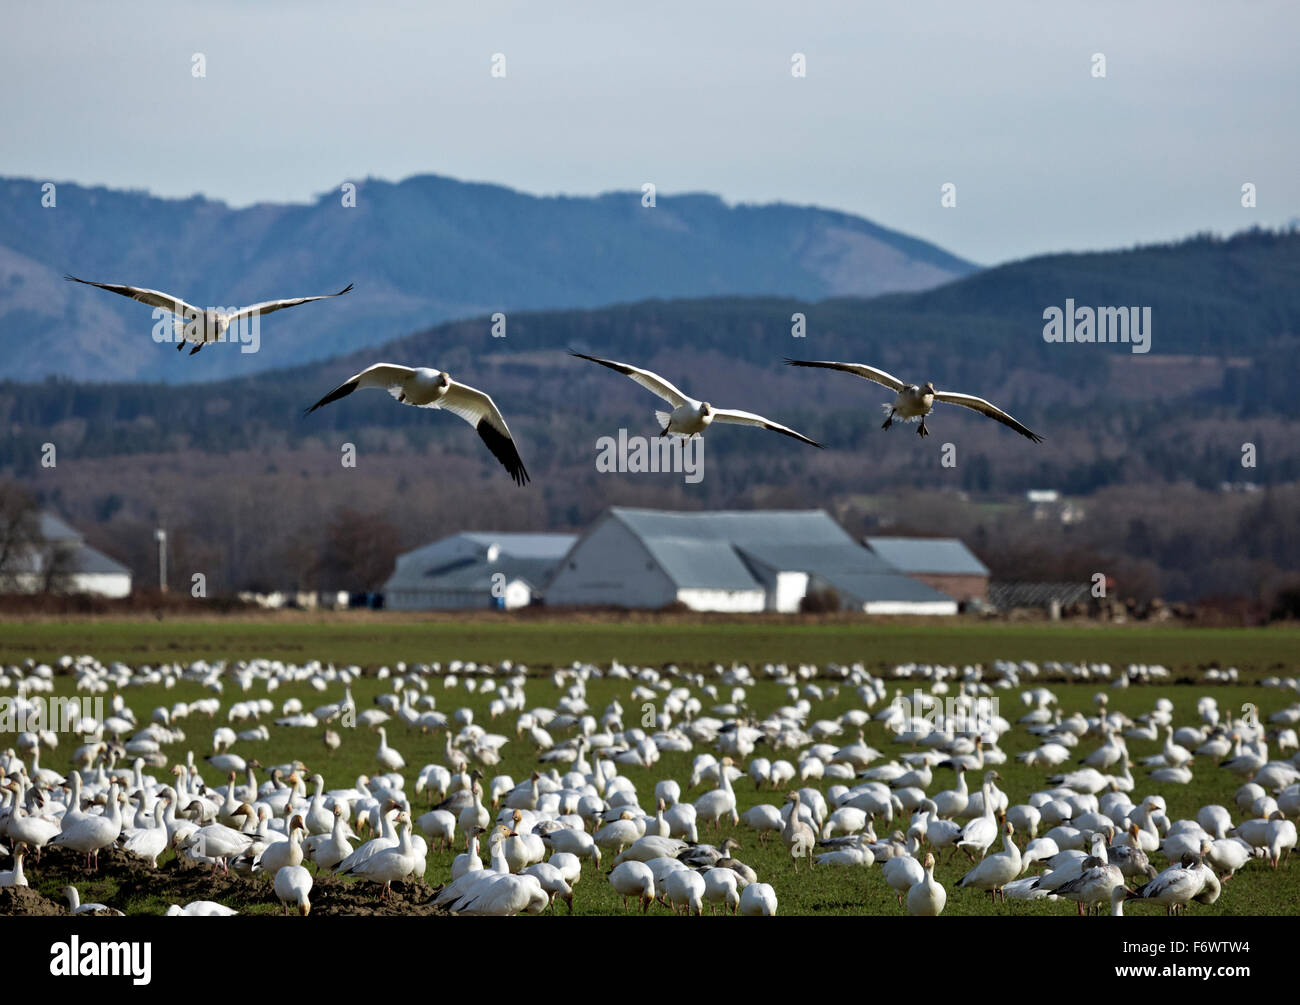 WA12060-00...WASHINGTON - Snow geese flying from the back of the flock to the front in a farm field at the Skagit Wildlife Area Stock Photo